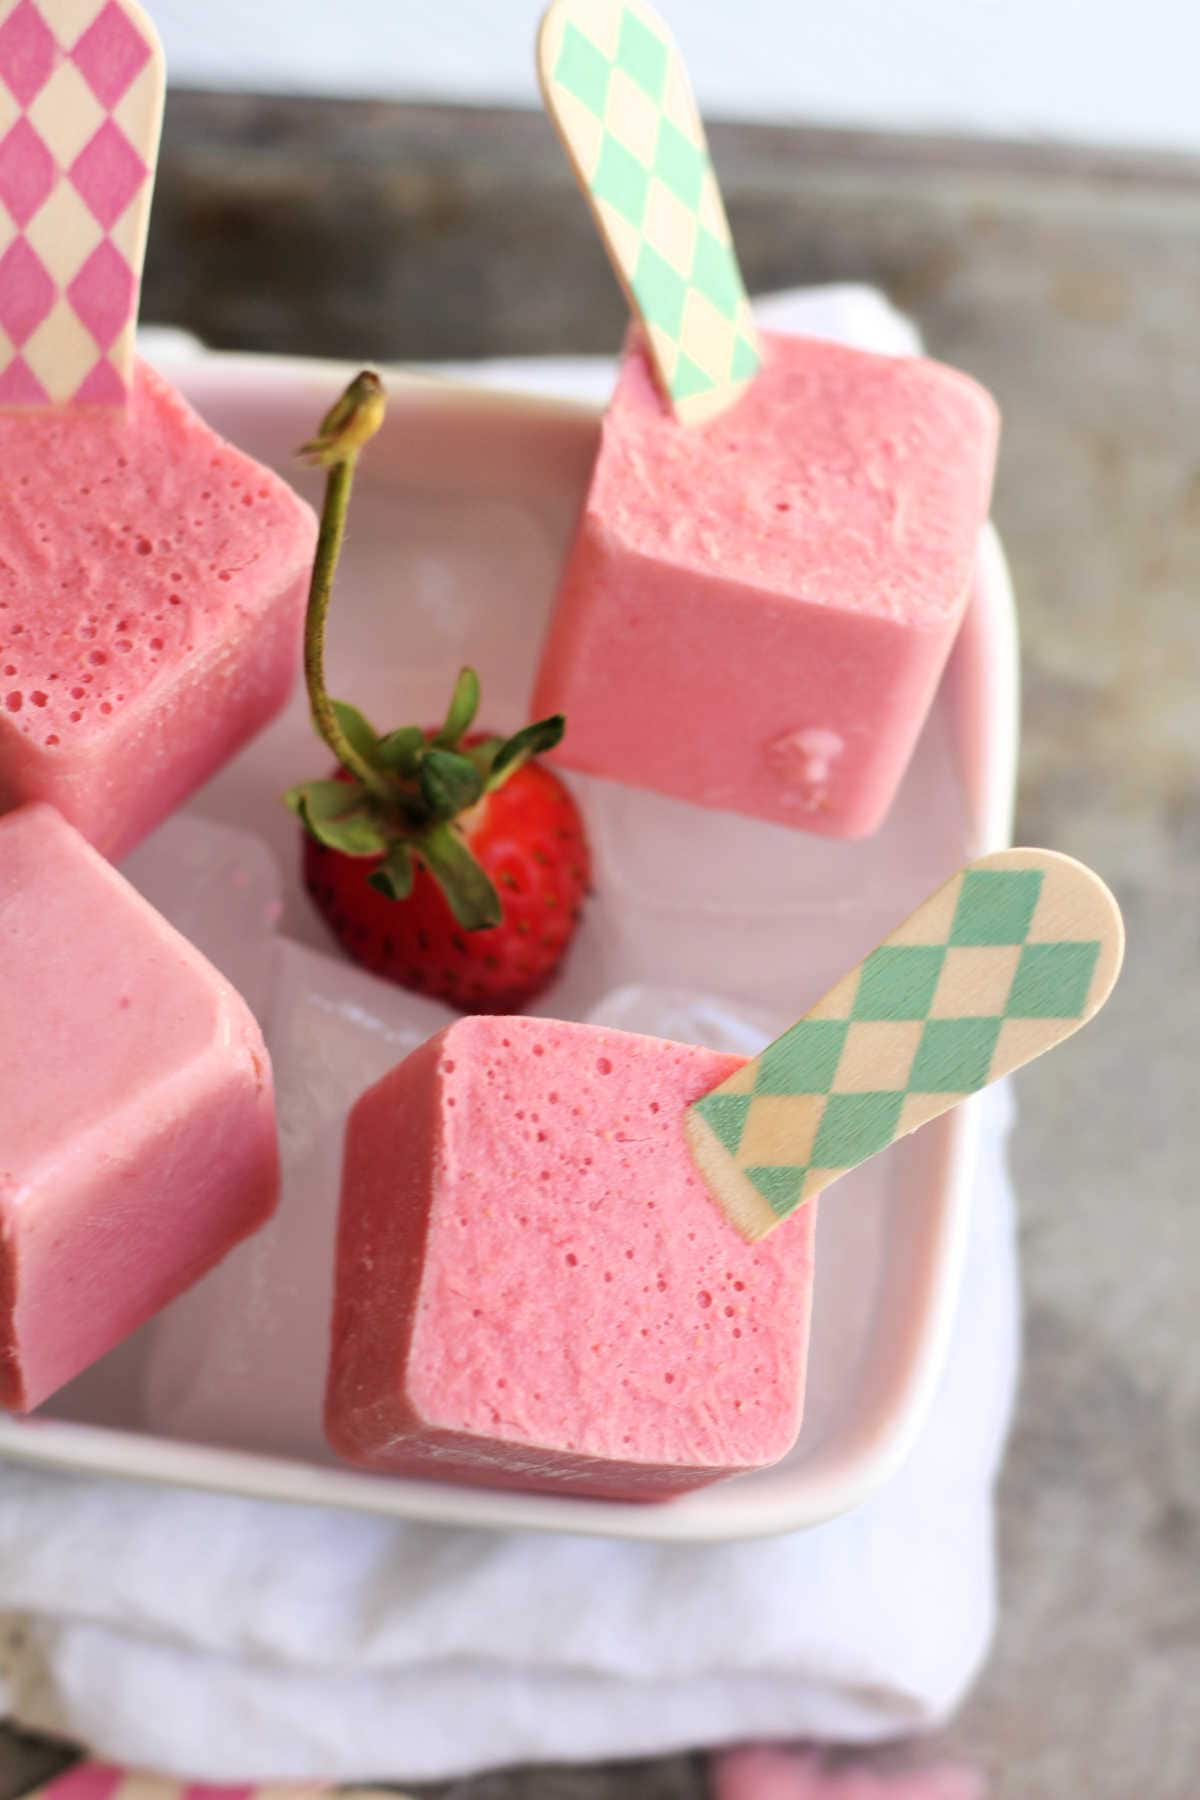 Creamy Strawberry Popsicles Over Ice With Fresh Strawberry In A White Bowl